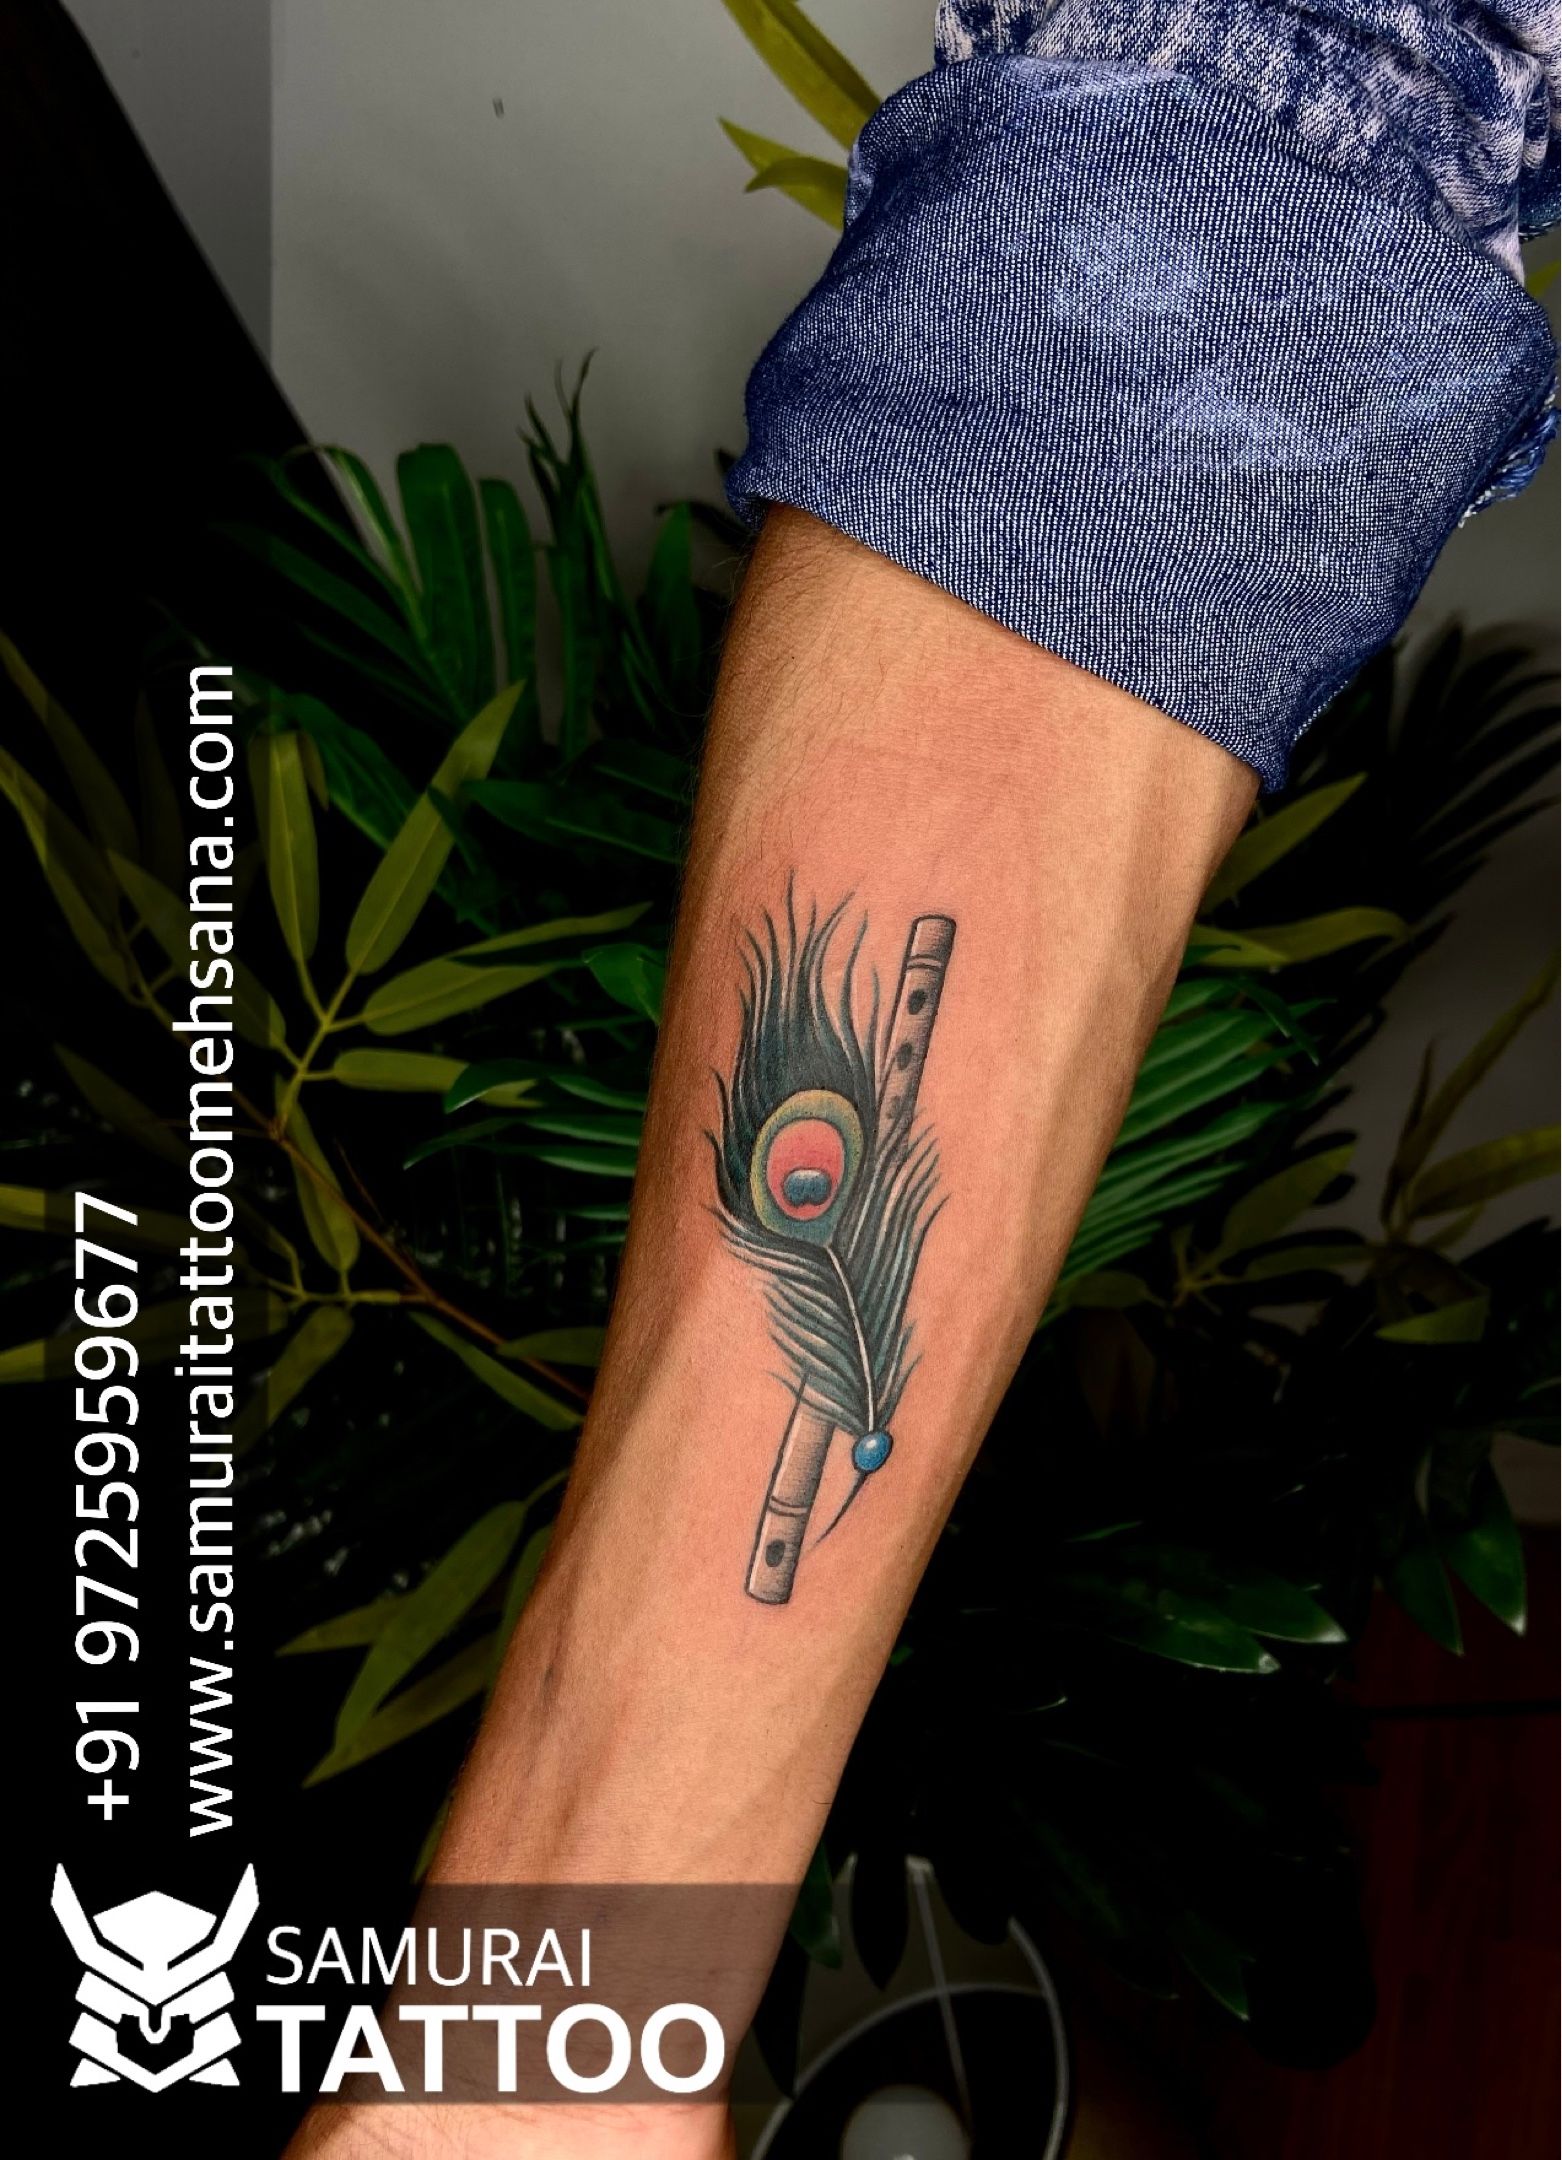 Flute and feather tattoo designs  peacock feathers tattoo  flute tattoos   tatto ideasTkIdeas  YouTube